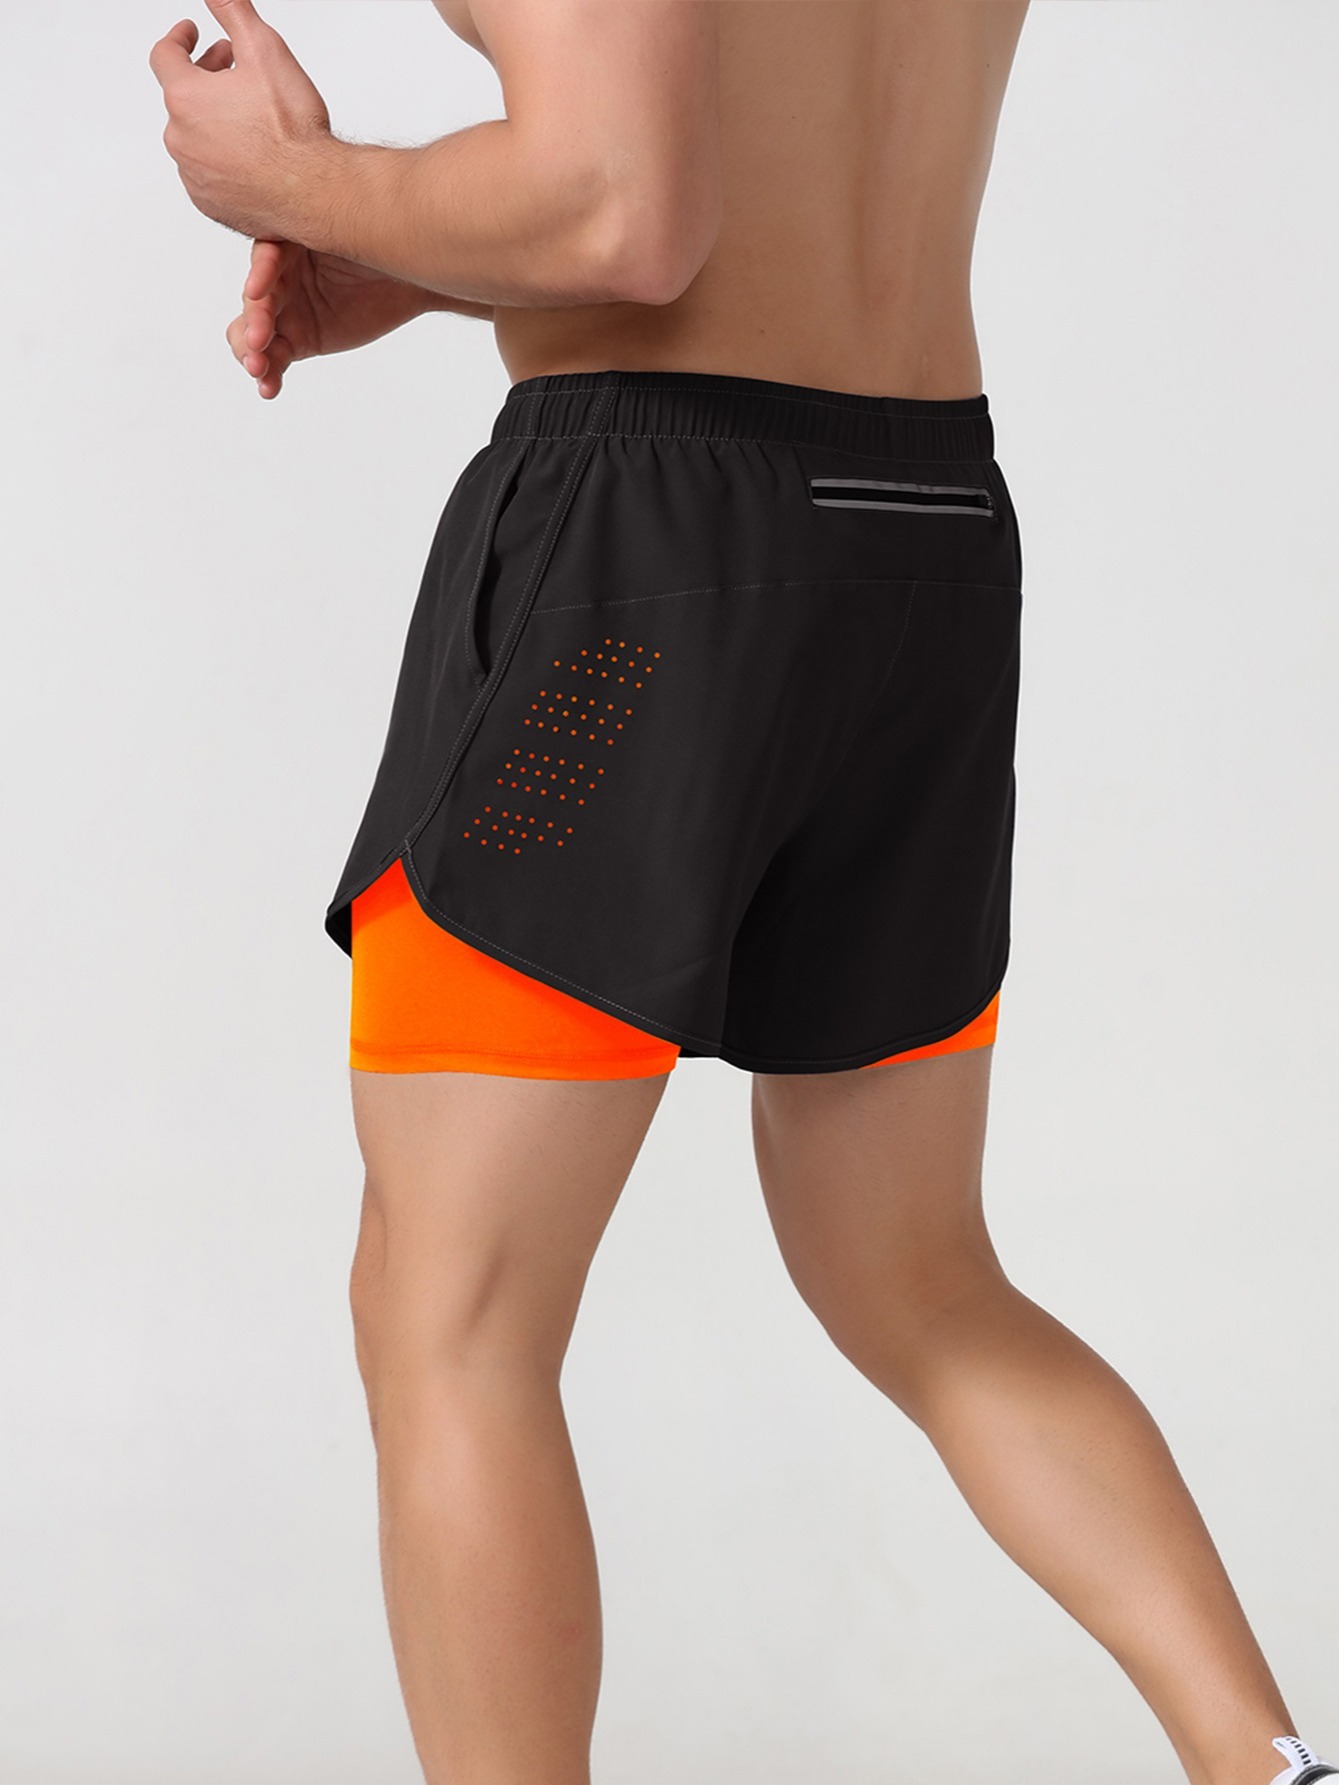 PEASKJP Mens Straight Shorts Athletic Gym Shorts Quick Dry Workout Running  Shorts with Pockets,Orange S